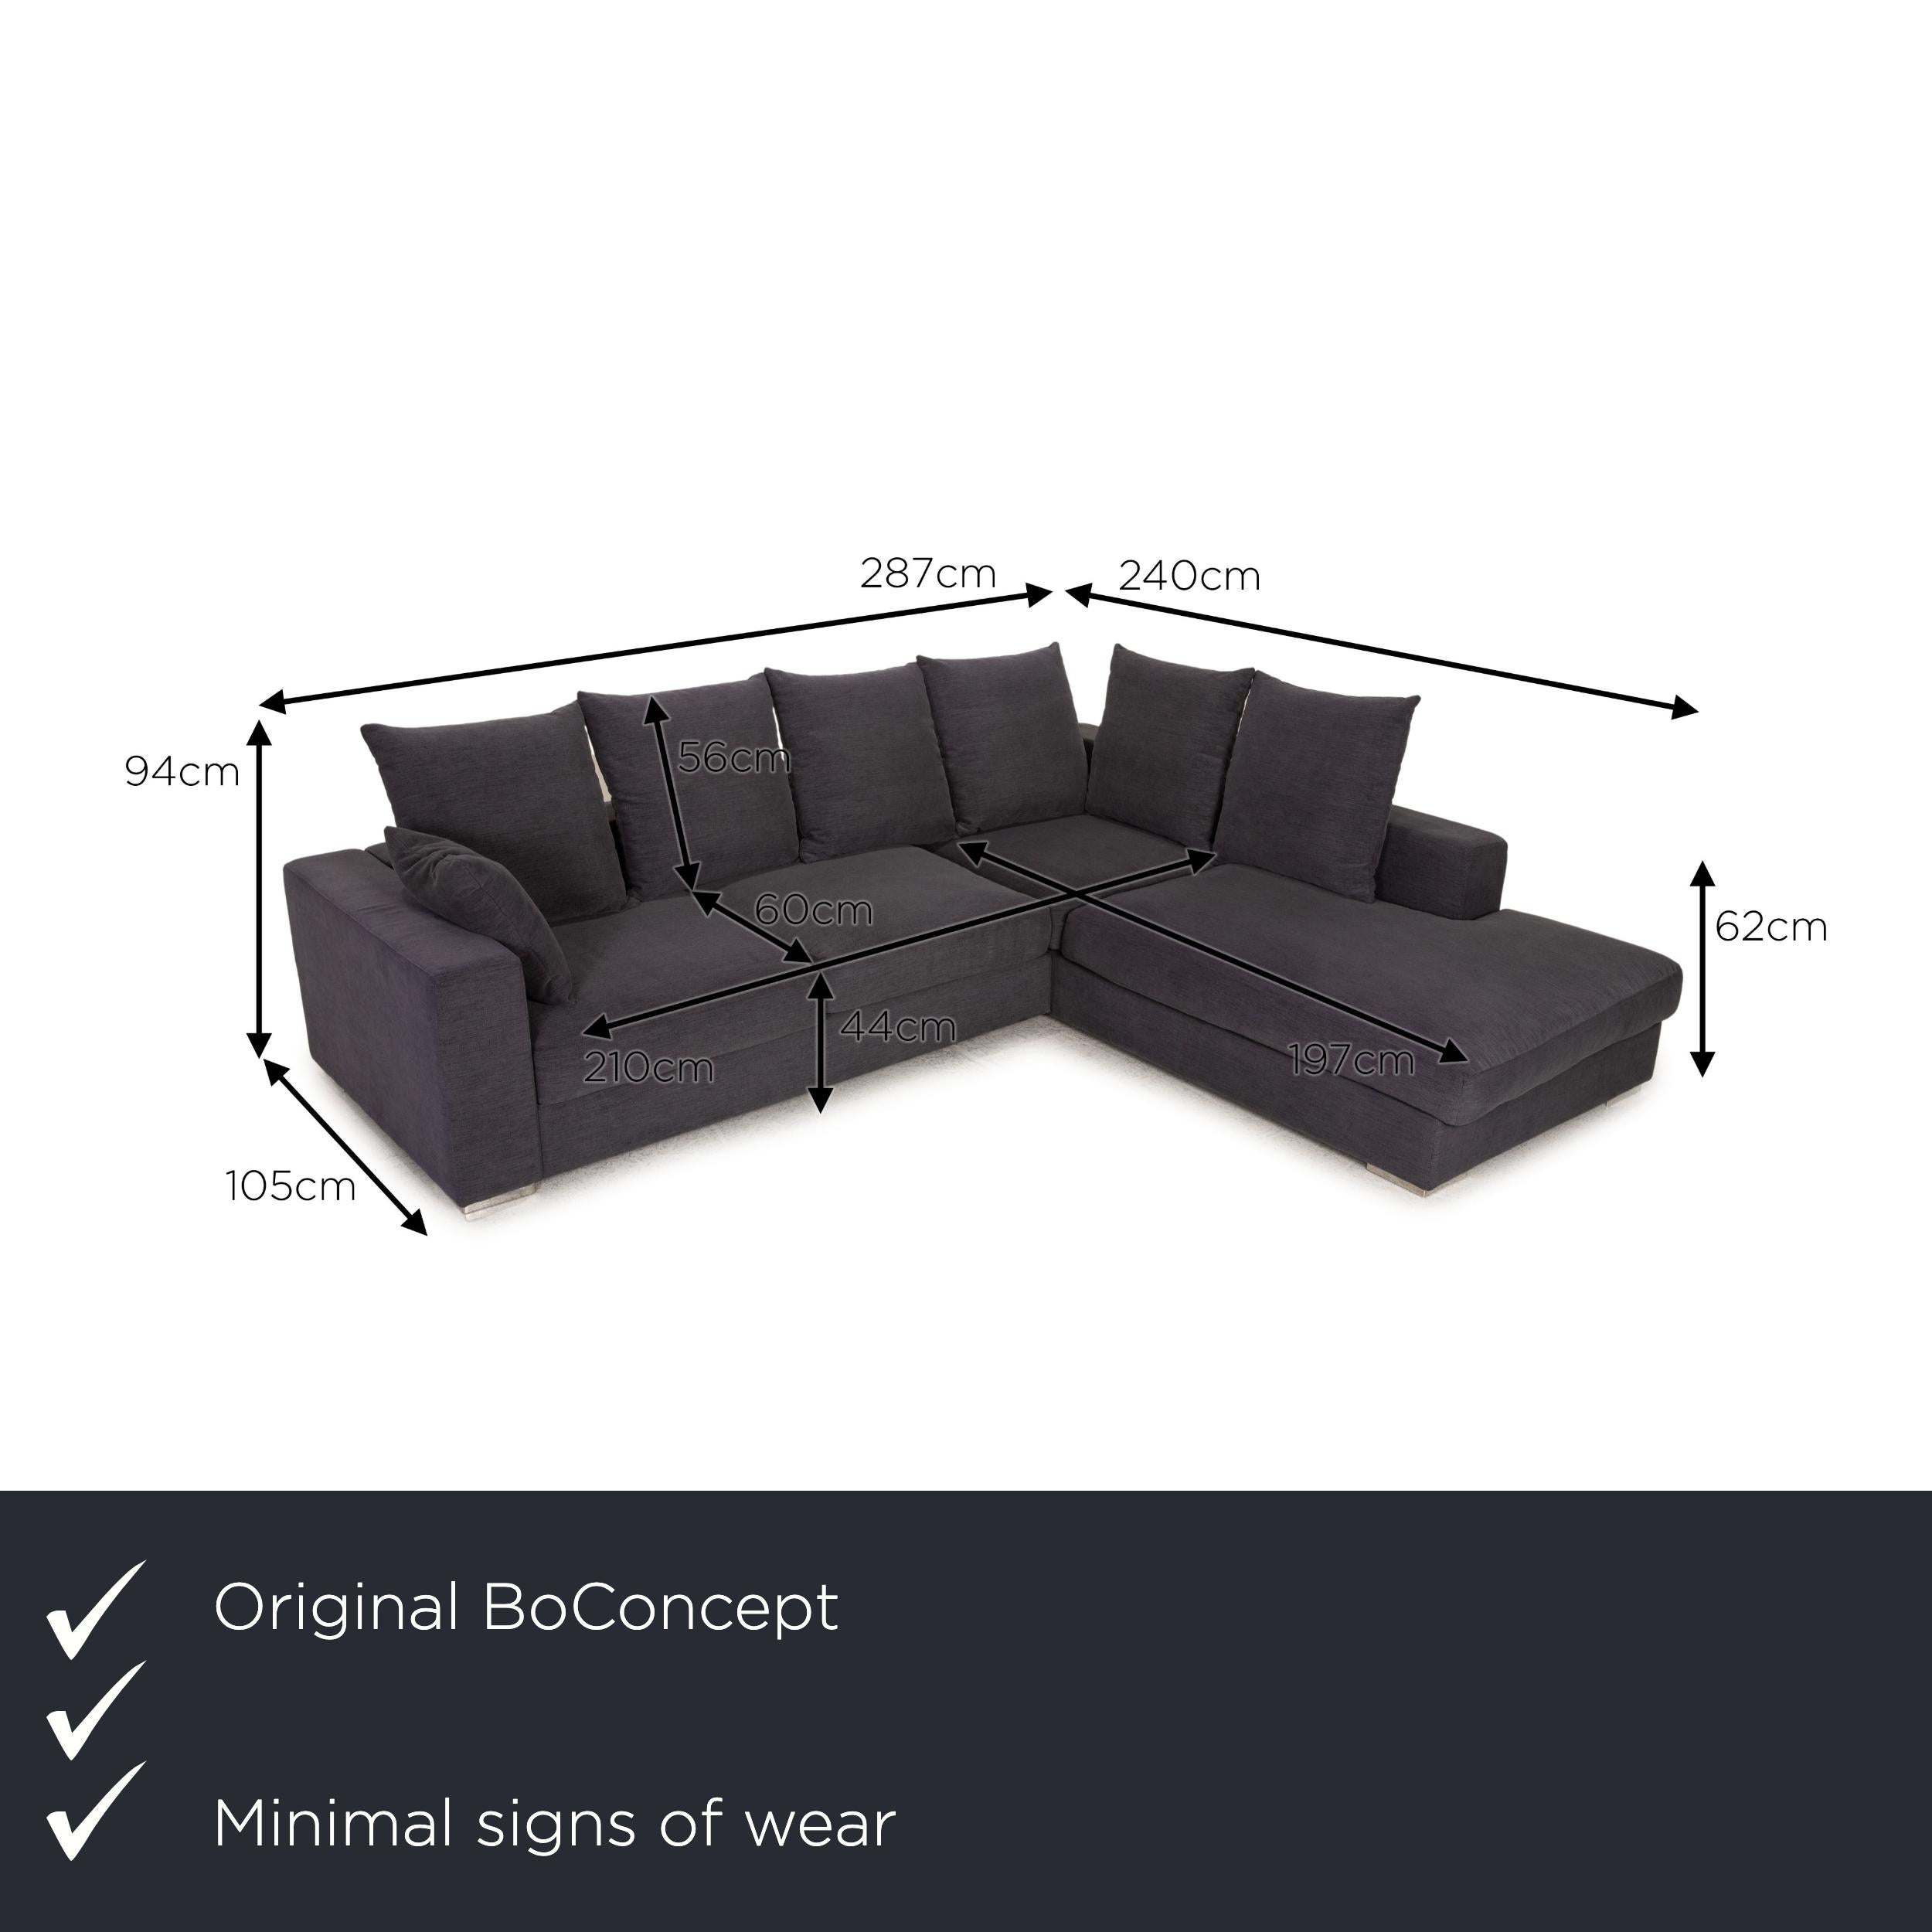 We present to you a BoConcept Cenova fabric sofa dark gray corner sofa couch.
 
Product measurements in centimeters:

depth: 105
width: 287
height: 94
seat height: 44
rest height: 62
seat depth: 60
seat width: 210
back height: 56.

 